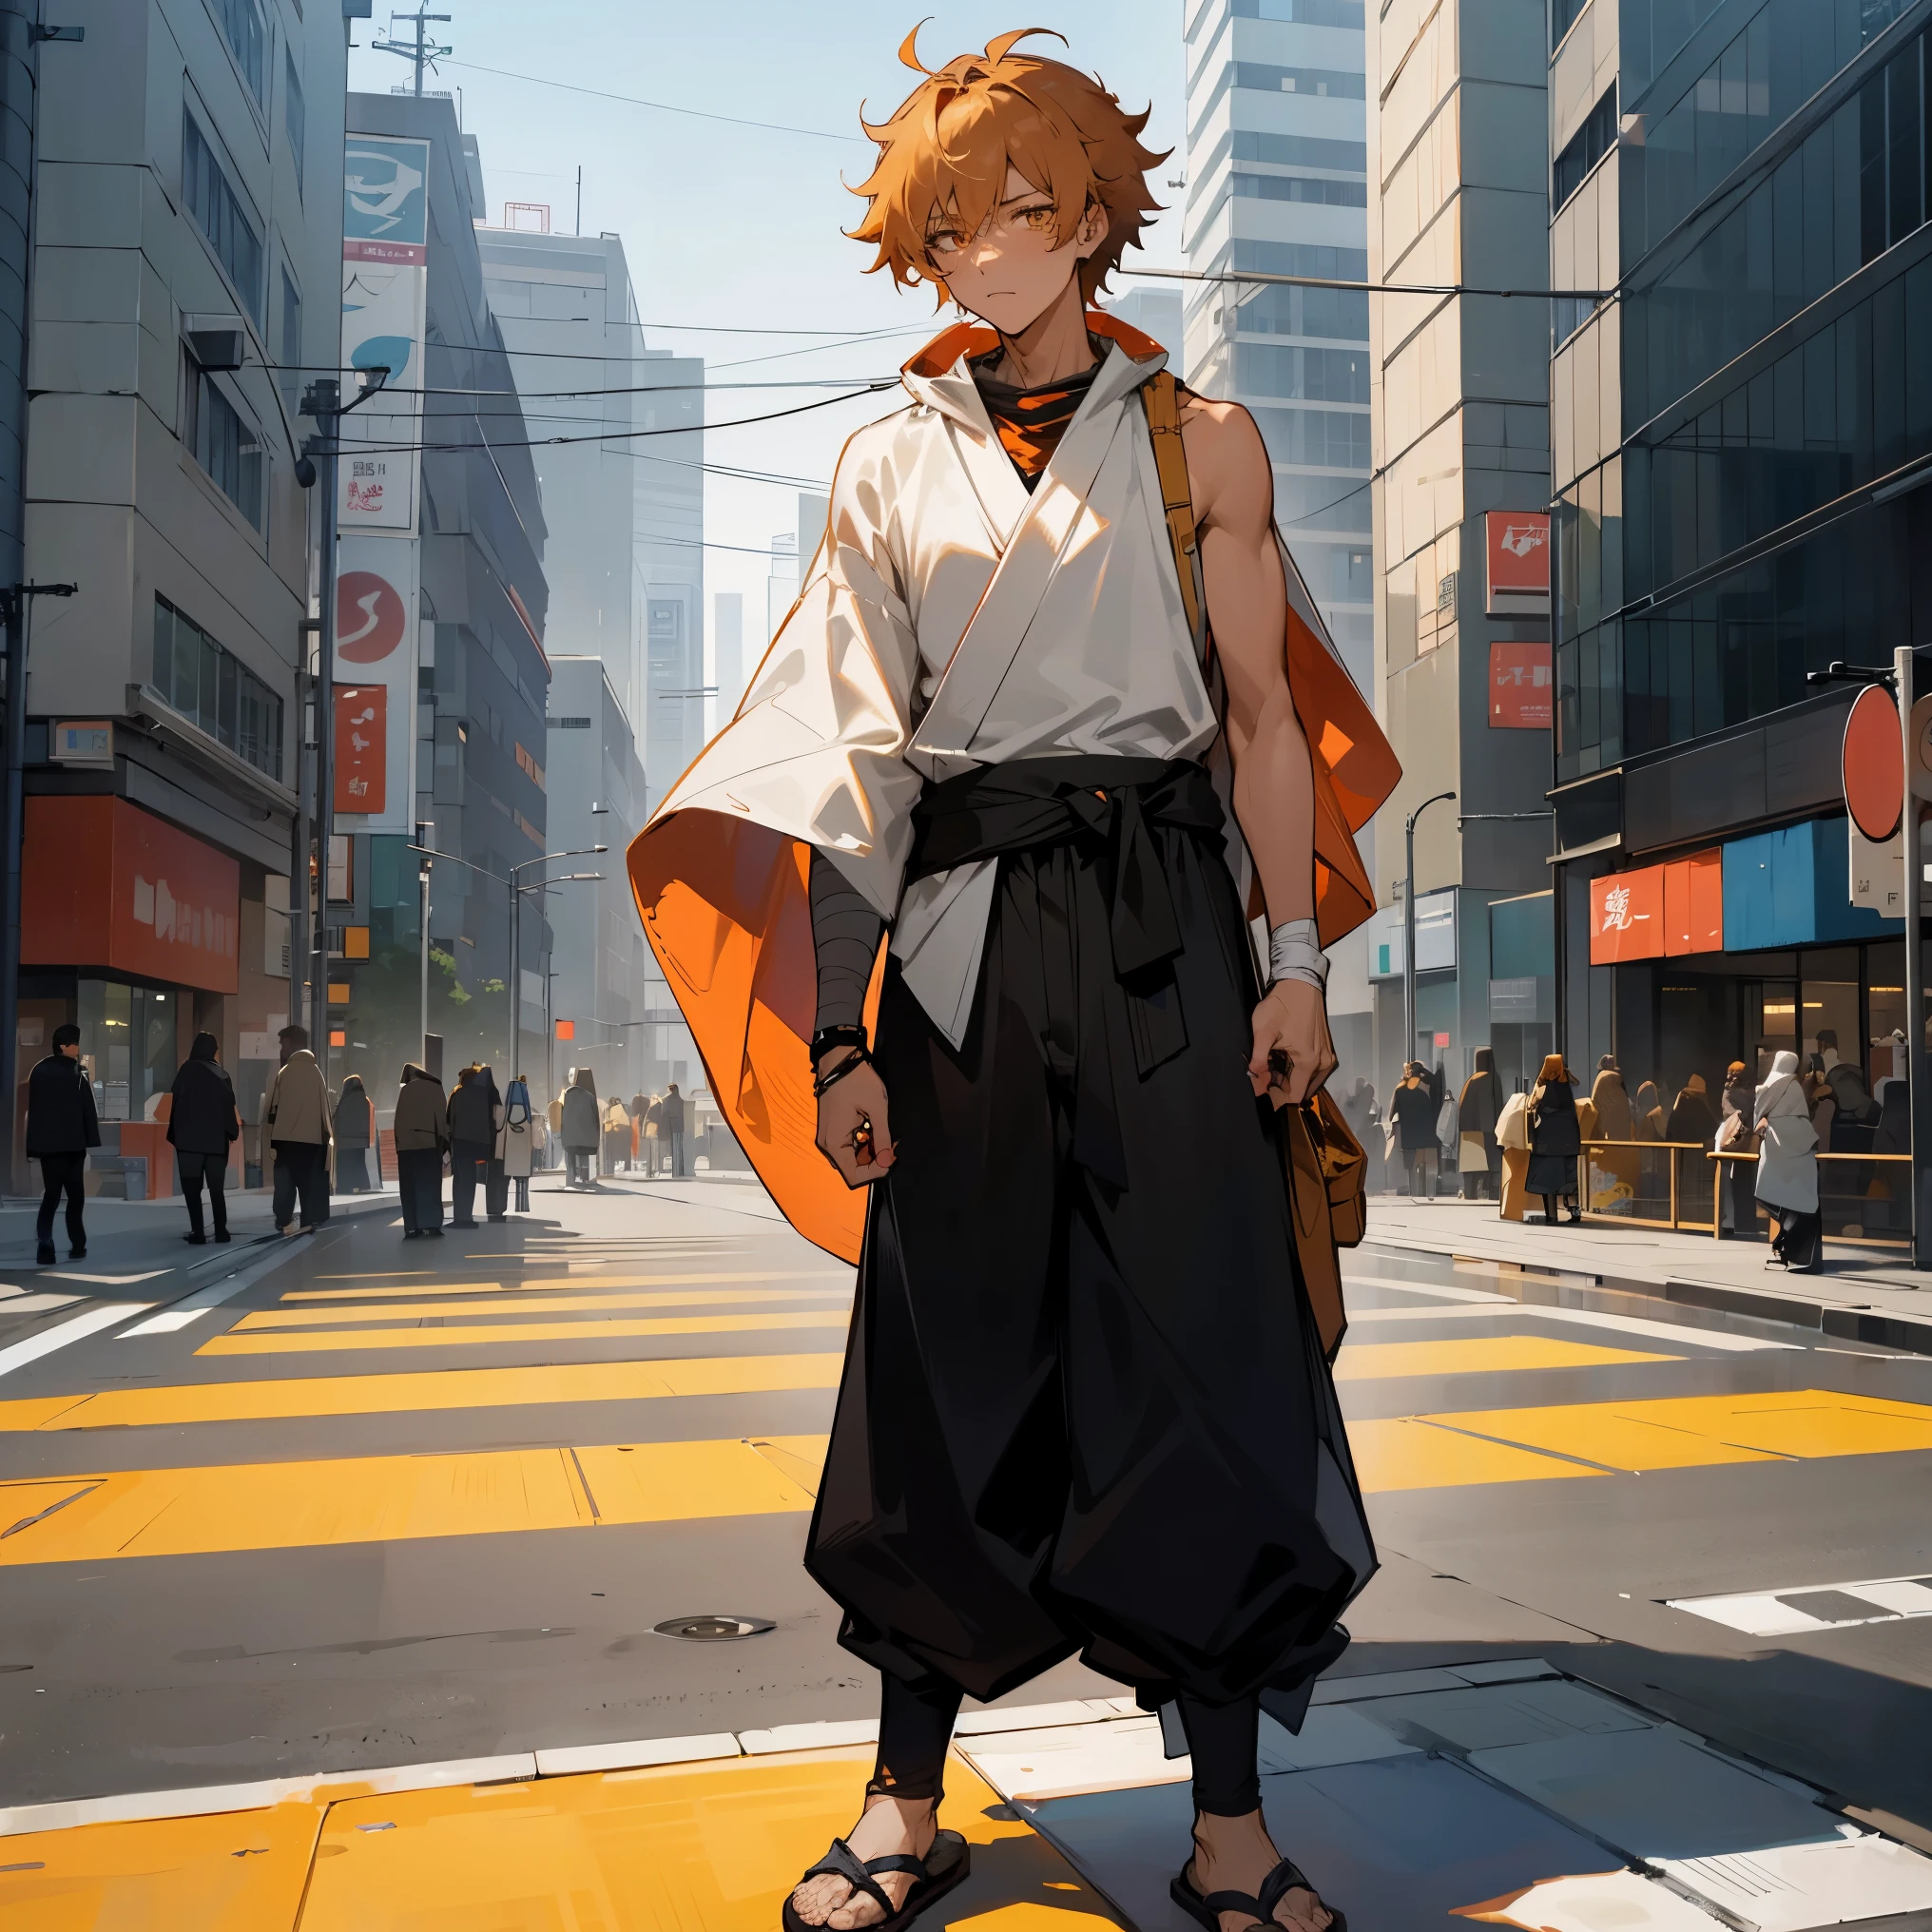 1male , Short Messy Hair , Peach Hair , Golden Eyes, Black one shoulder Yukata , Bandaged Arm , Tan Poncho , Tan Cowl , Baggy Black Pants , Japanese Sandals with socks , Facing Viewer , Modern City Background, Adult Male , Standing On Sidewalk , Adult Male , Serious Expression 